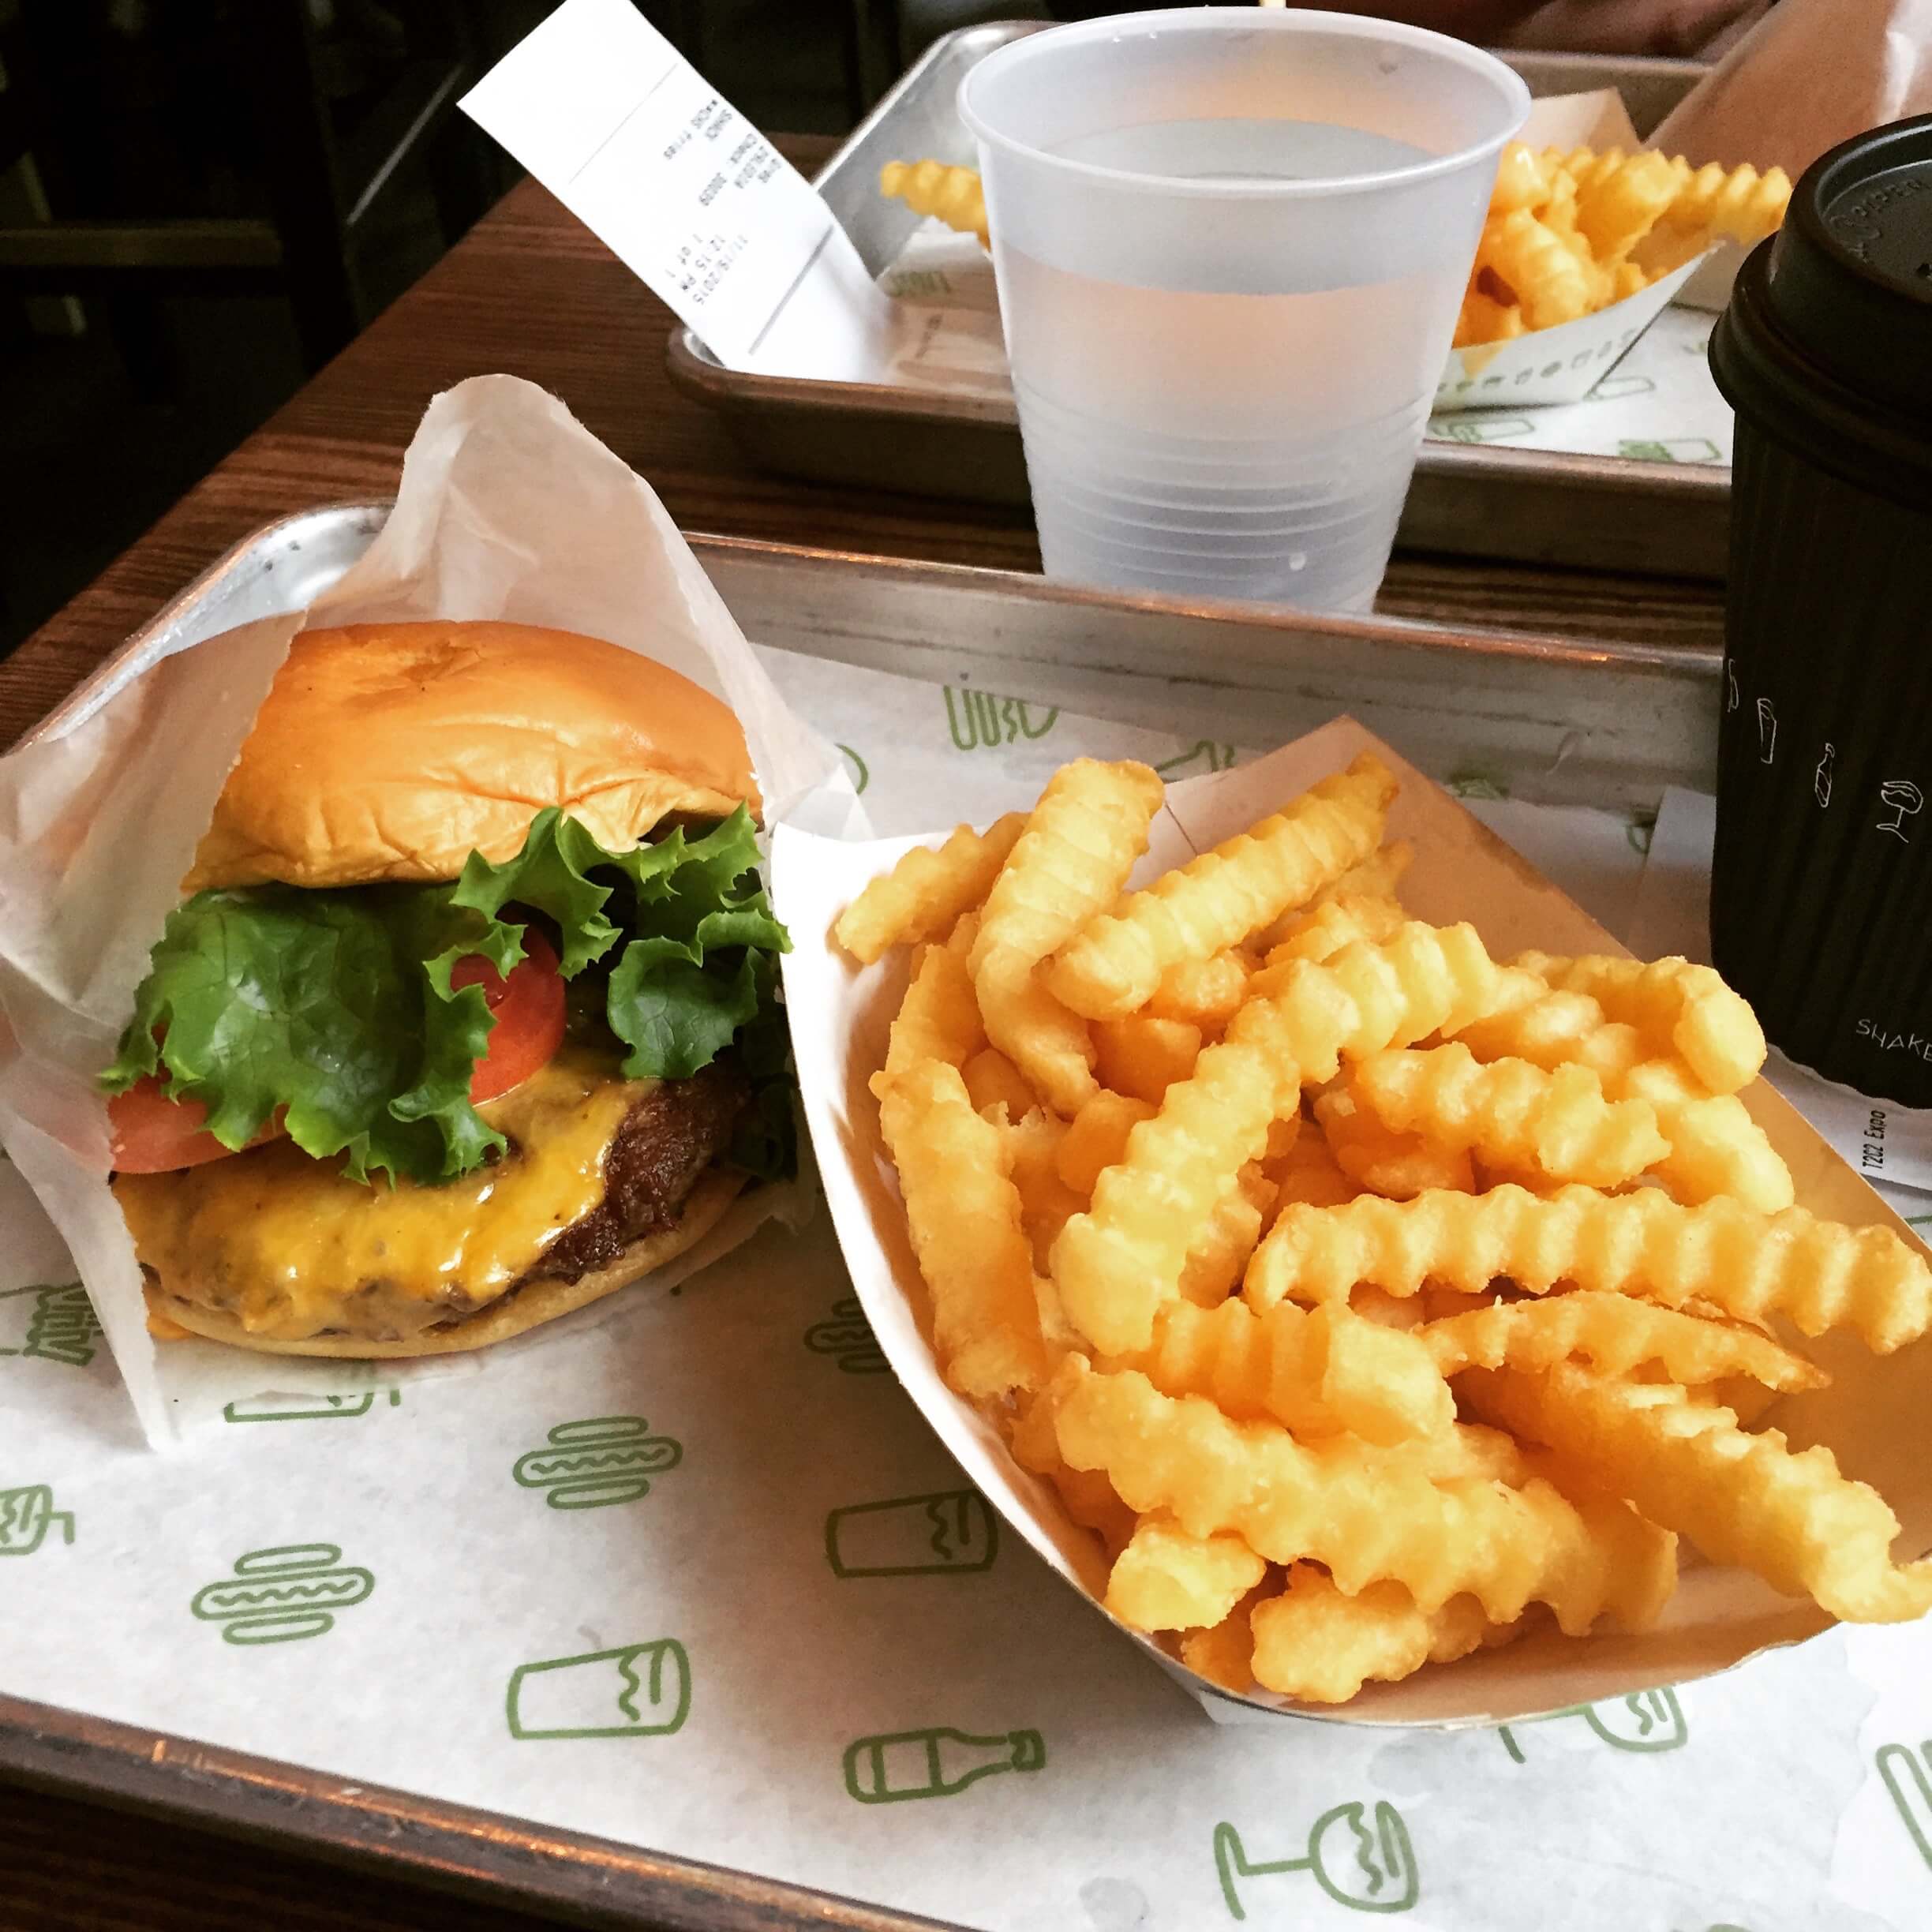 burger and fries on a tray from Shake Shack